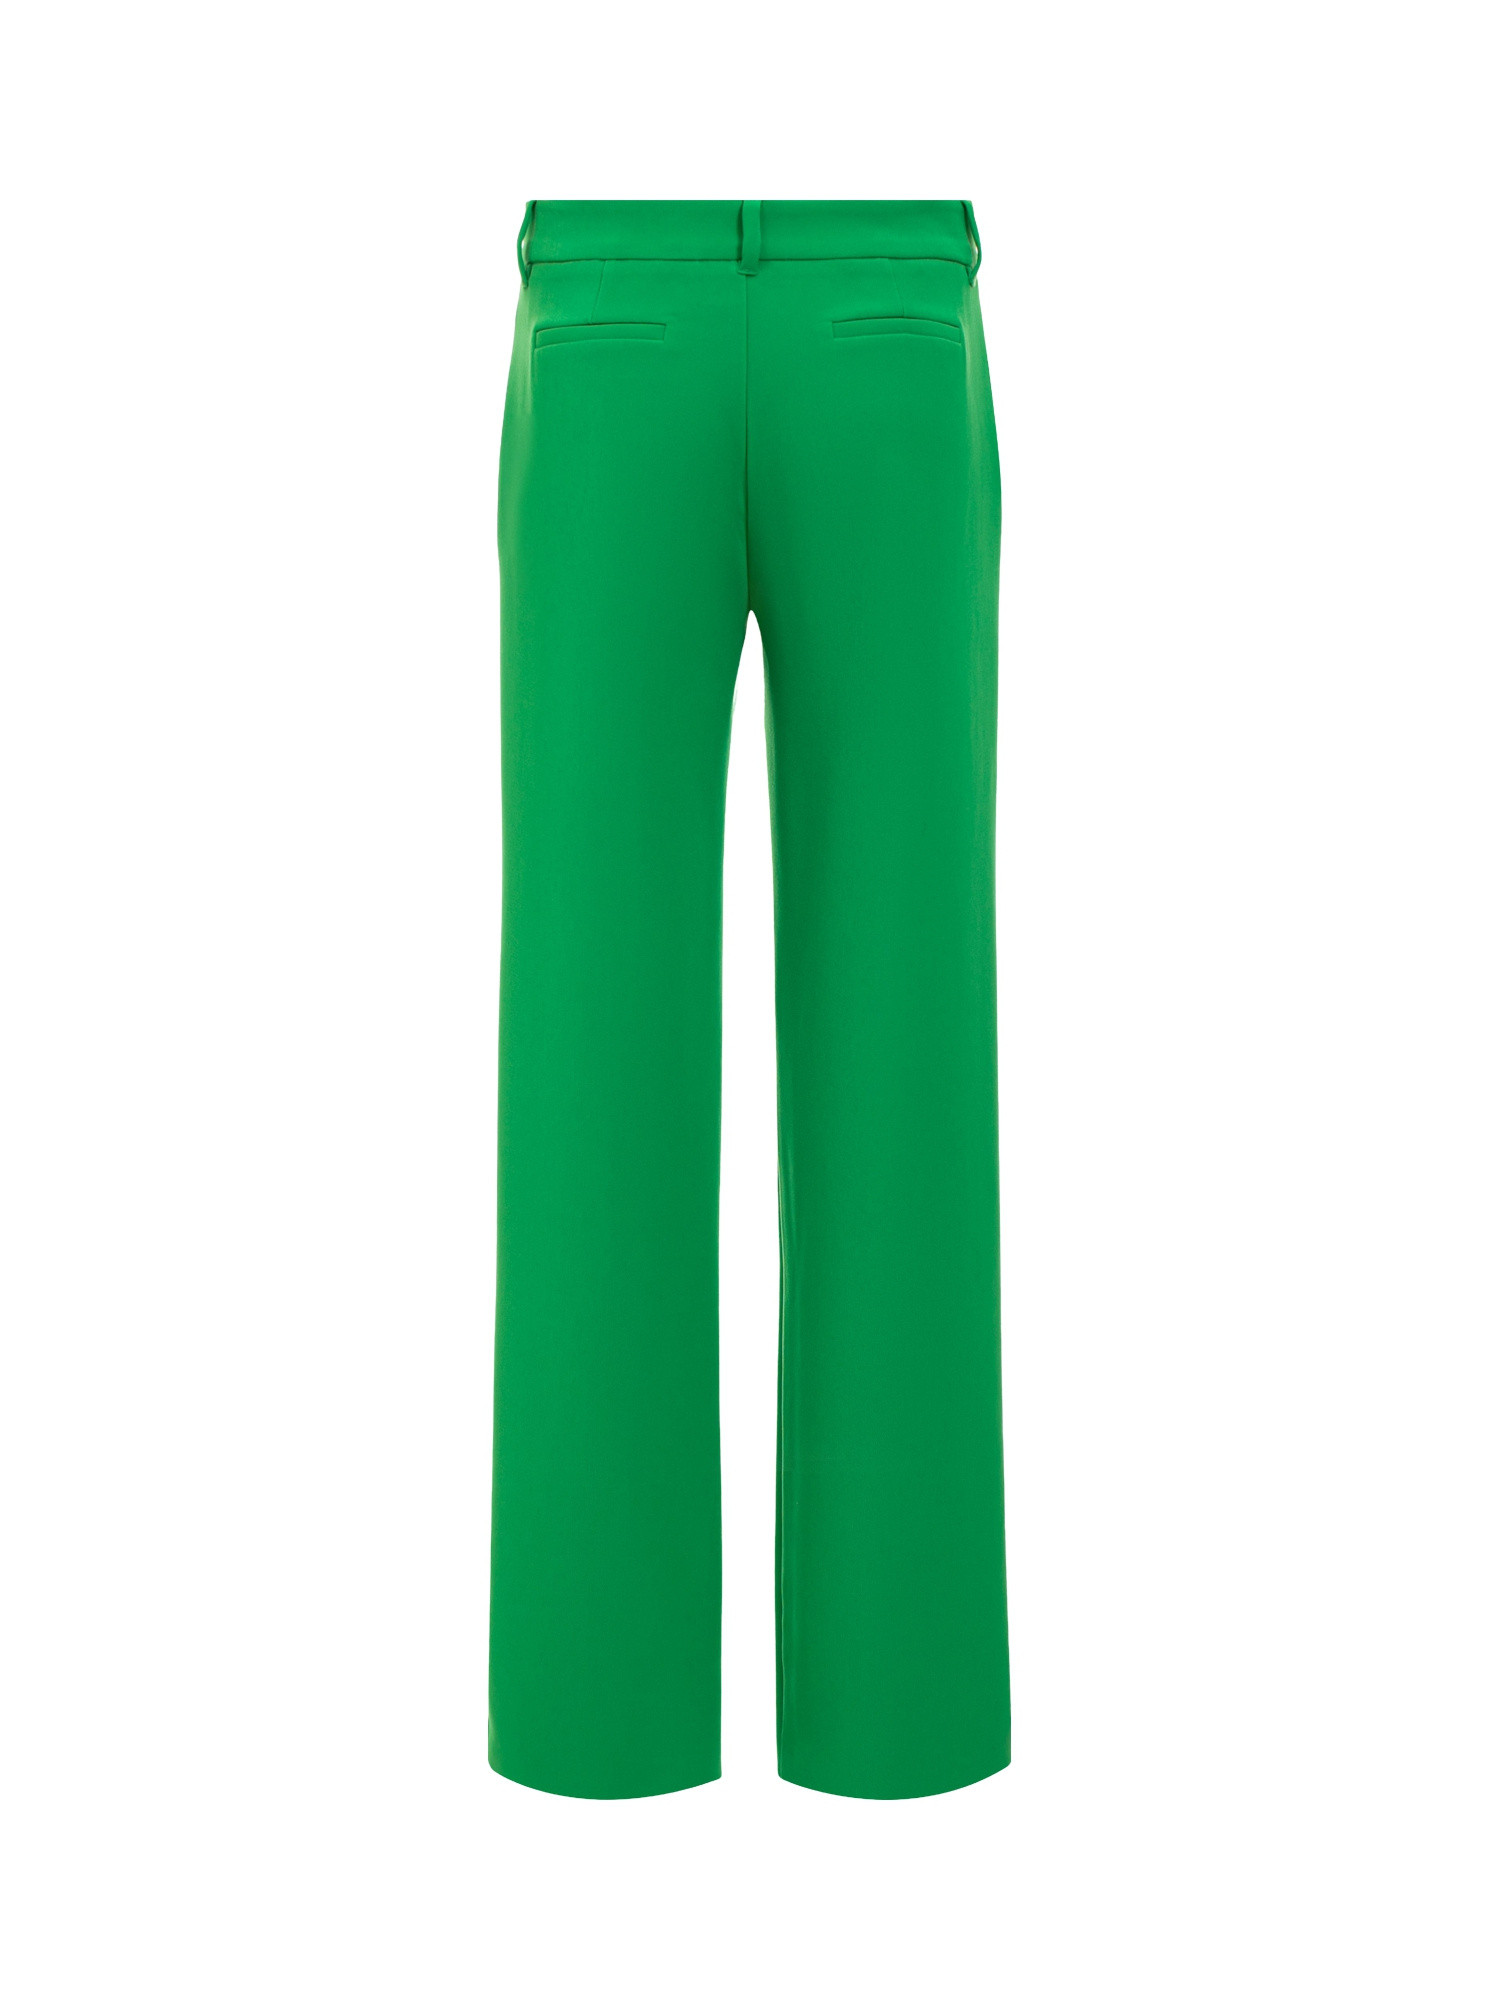 Chiara Ferragni - Bistretch cady trousers, jewel button and slit in the center front, soft line, Green, large image number 1